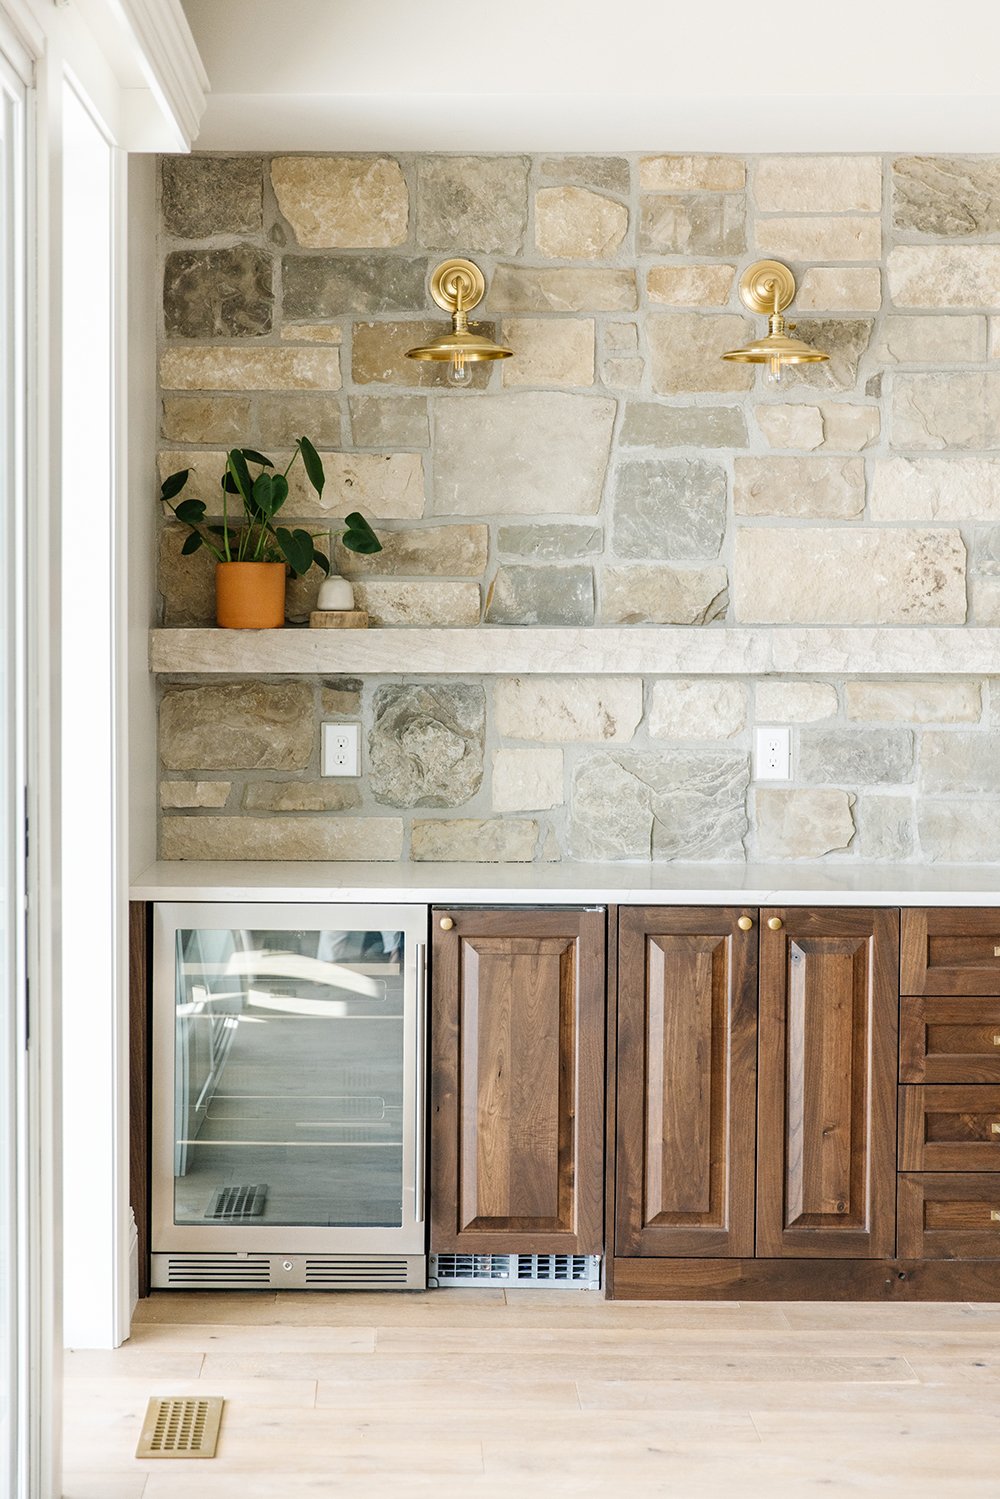  Using the rock as a backsplash in this area follows the house's theme. The golden sconces pair well with the golden handles on the cabinetry. Stone backsplash gold sconce kitchenette #stoneaccentwall #goldensconce #stoneshelf #kitchenette 